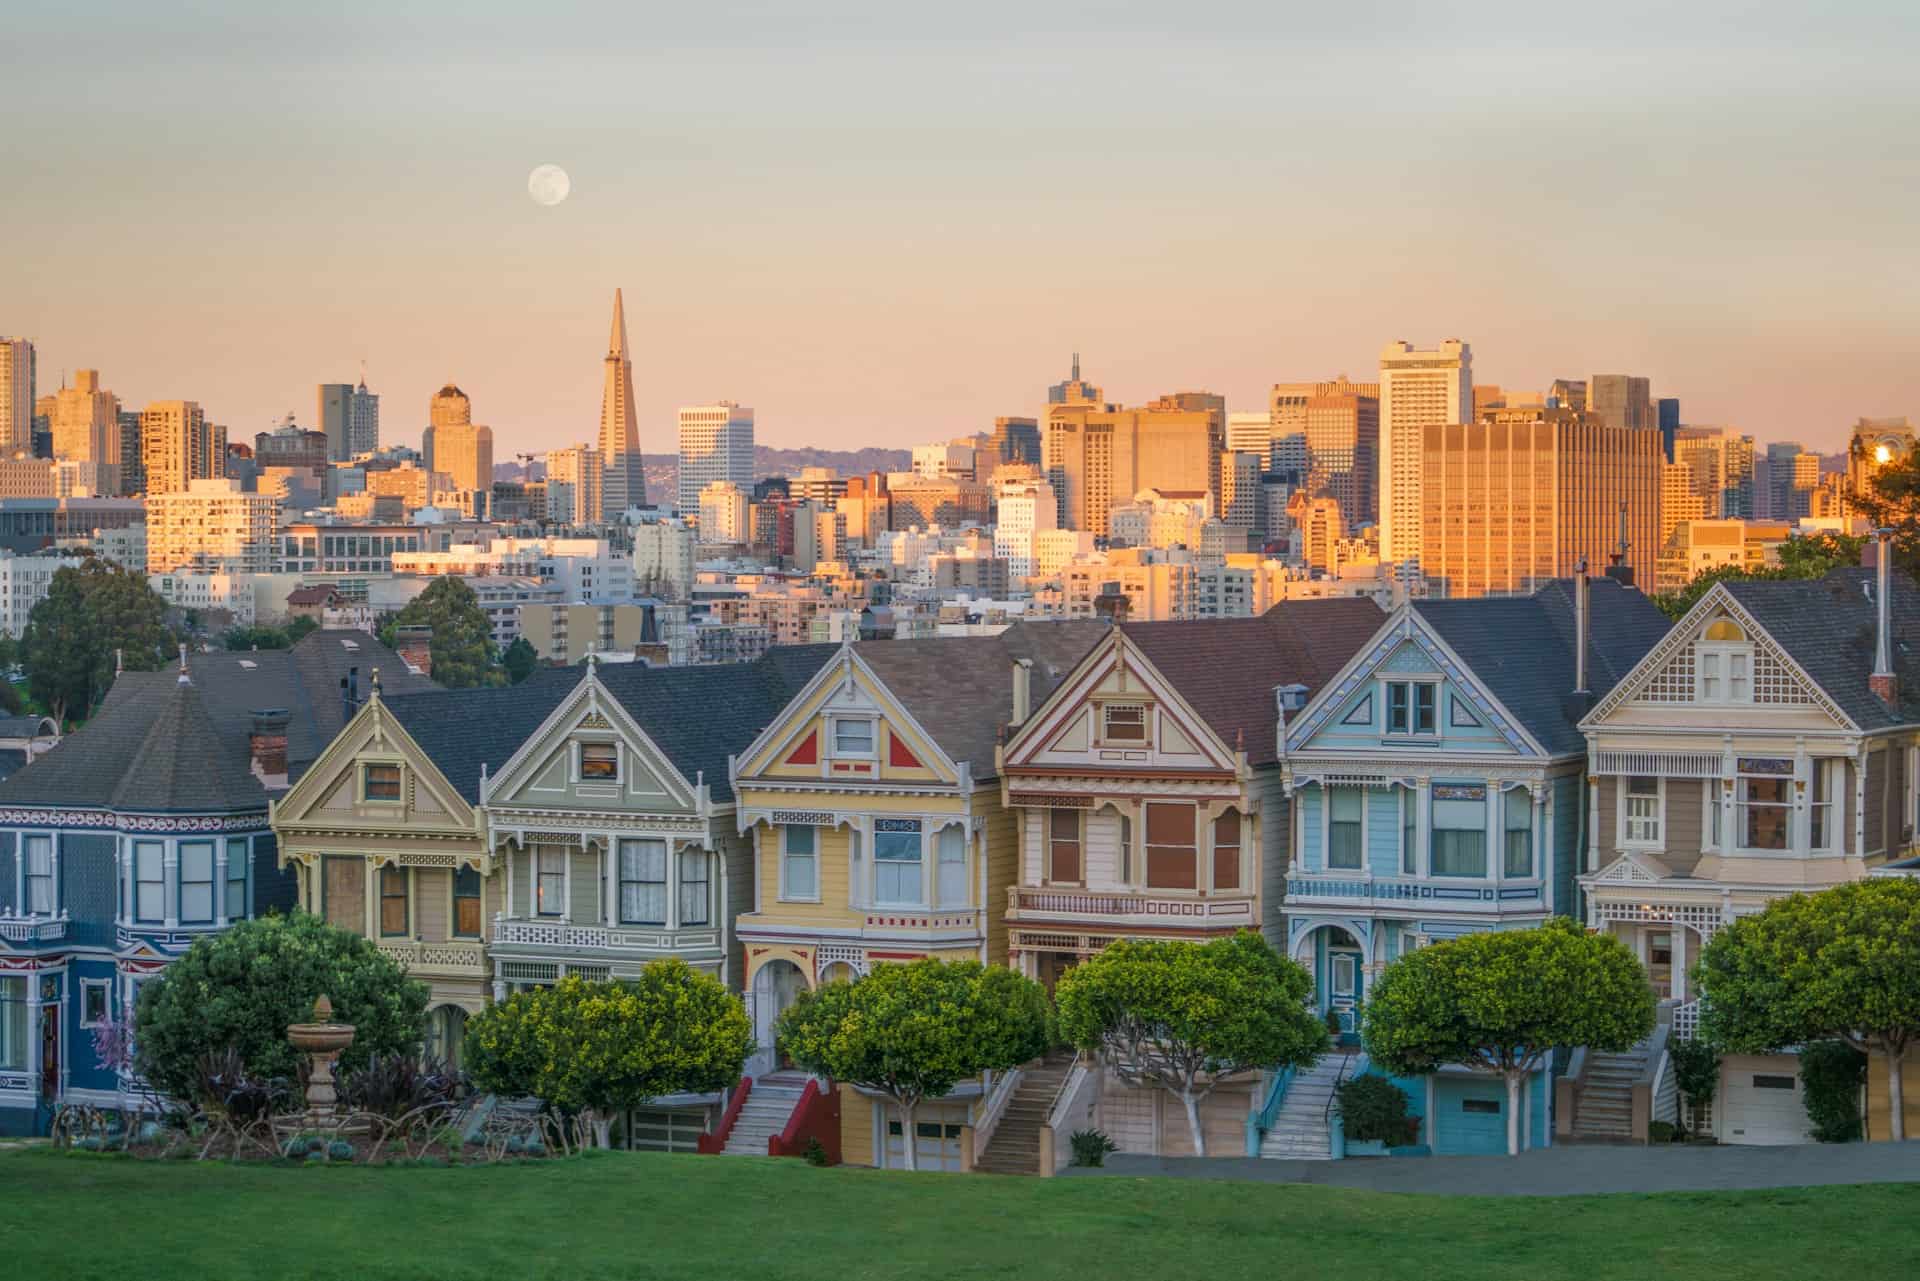 Painted Ladies houses in San Francisco with the city skyline in the background. 